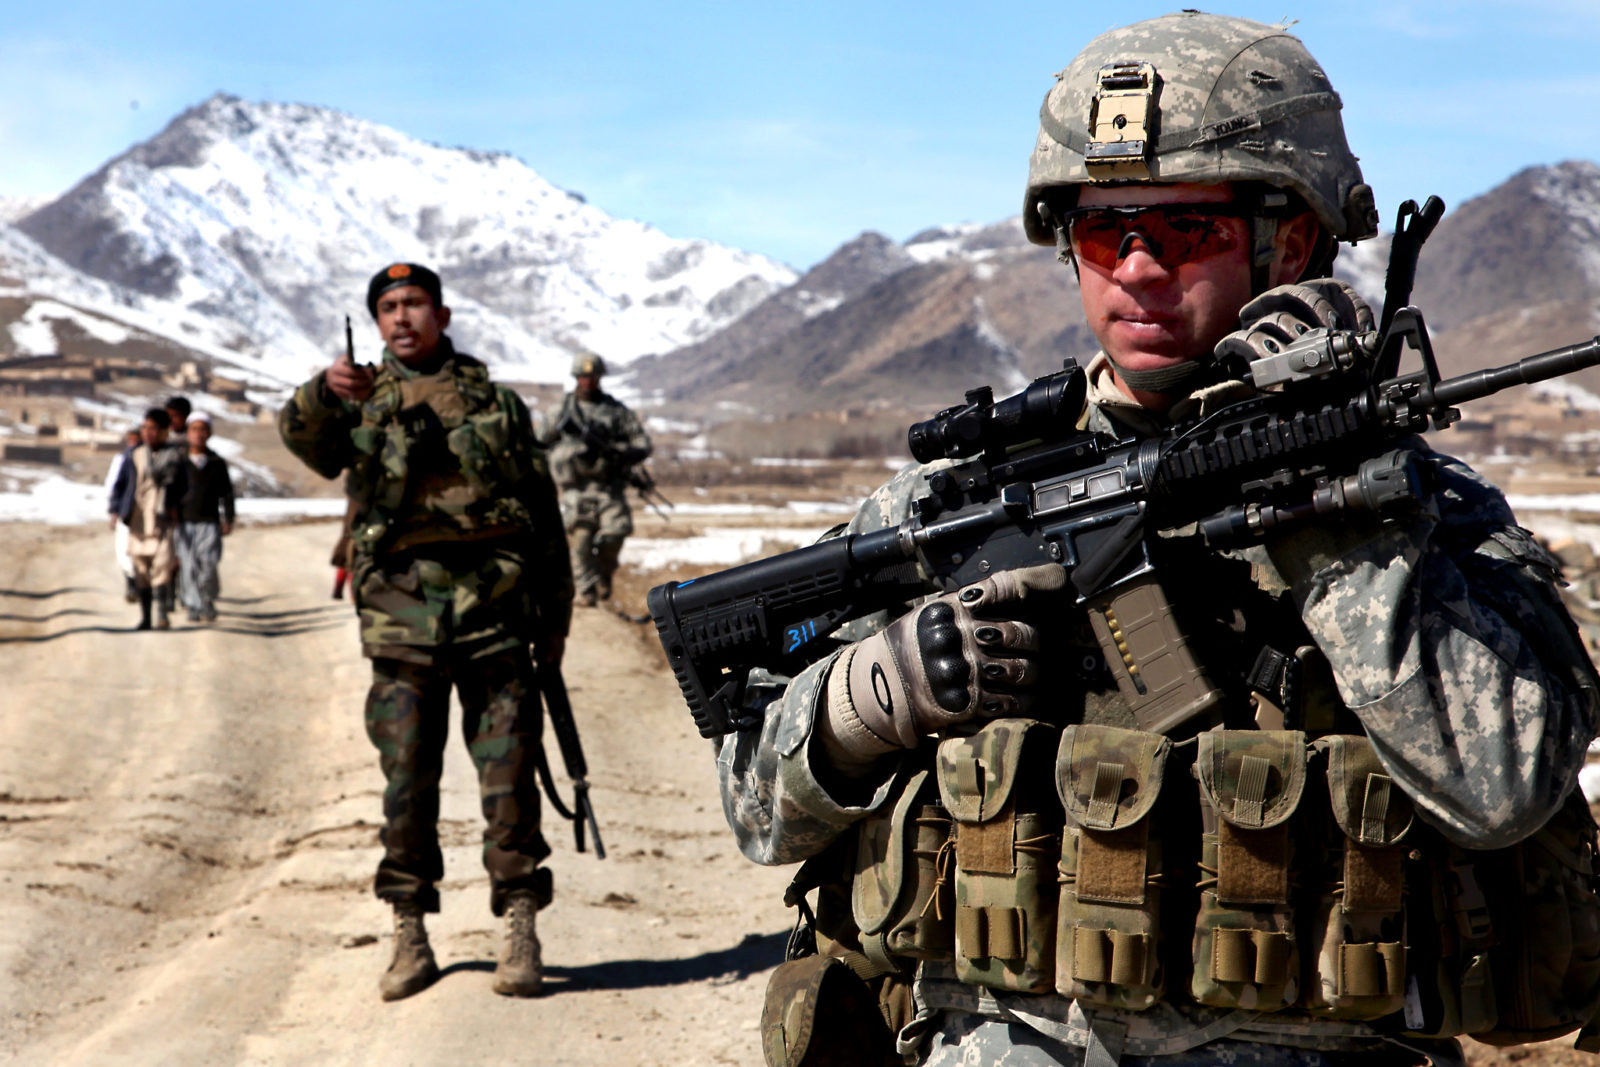 A trooper with the 173rd Airborne Brigade on patrol with Afghan soldiers in Wardak province, Feb. 2010.